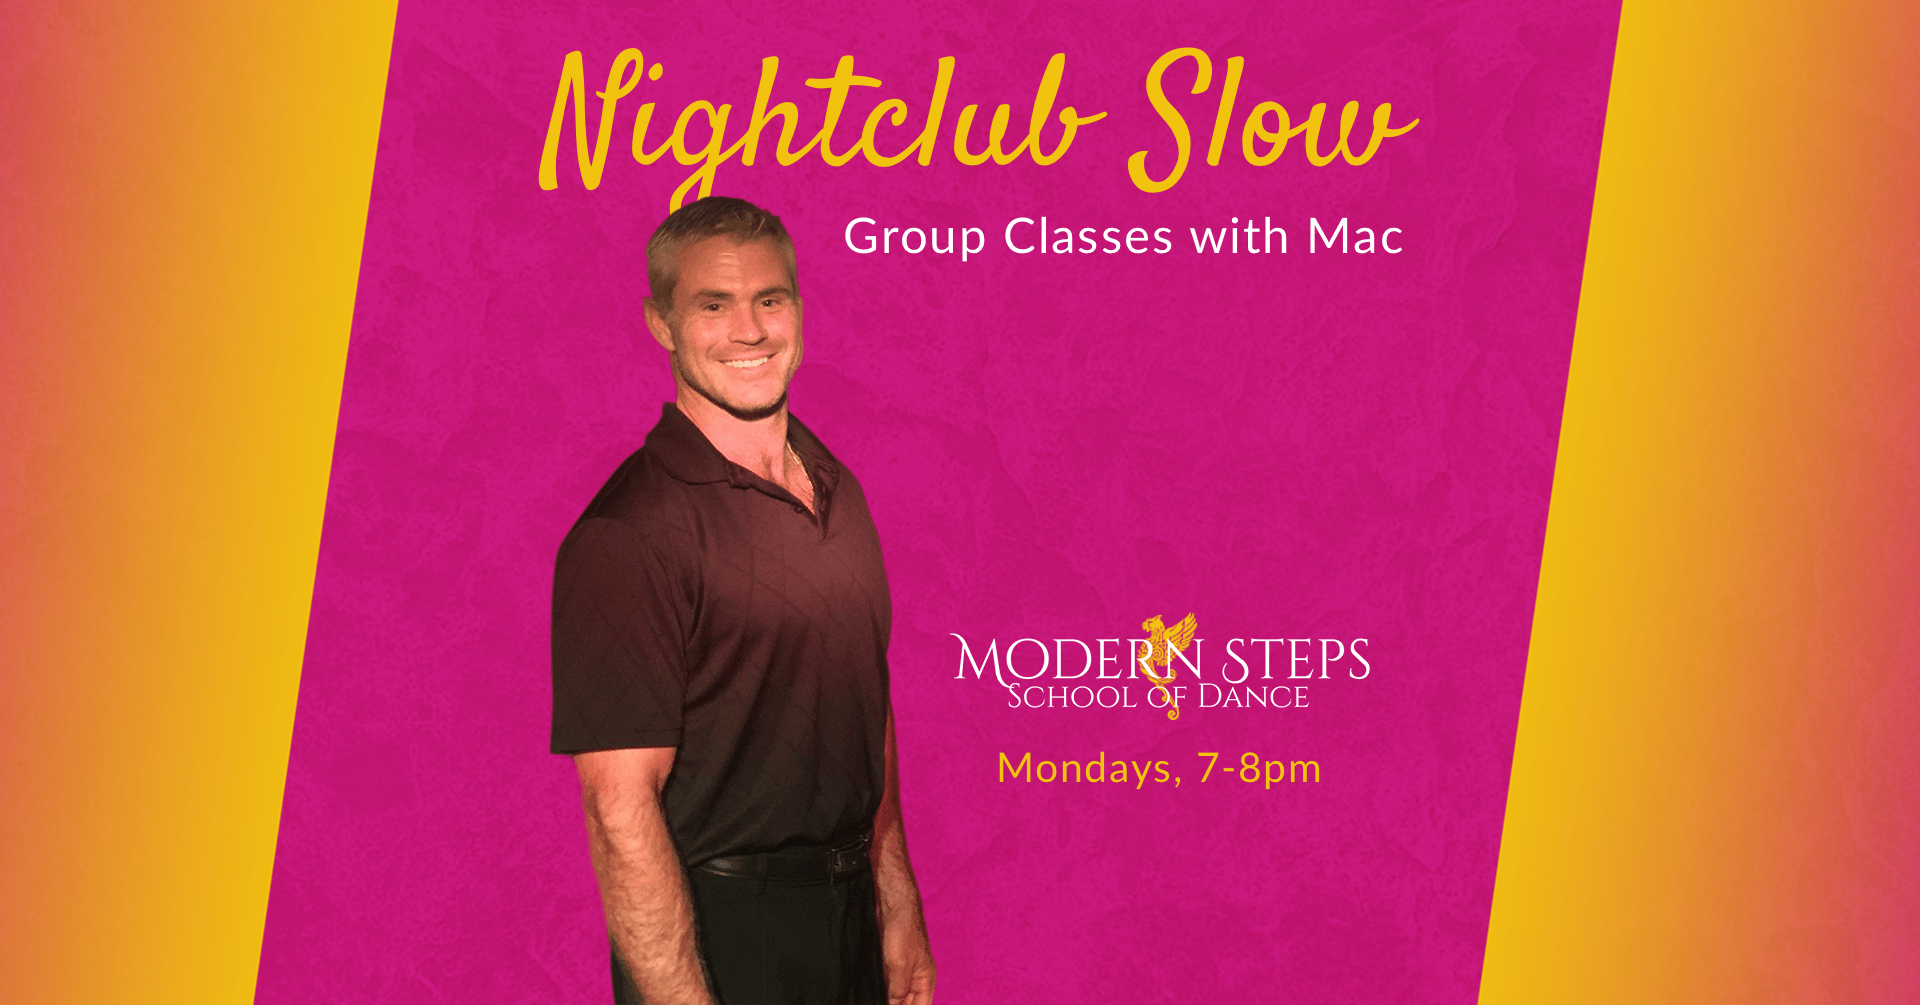 Nightclub Slow group dance classes with Mac at Modern Steps Dance Studio in Naples Florida - Naples Florida Things to Do